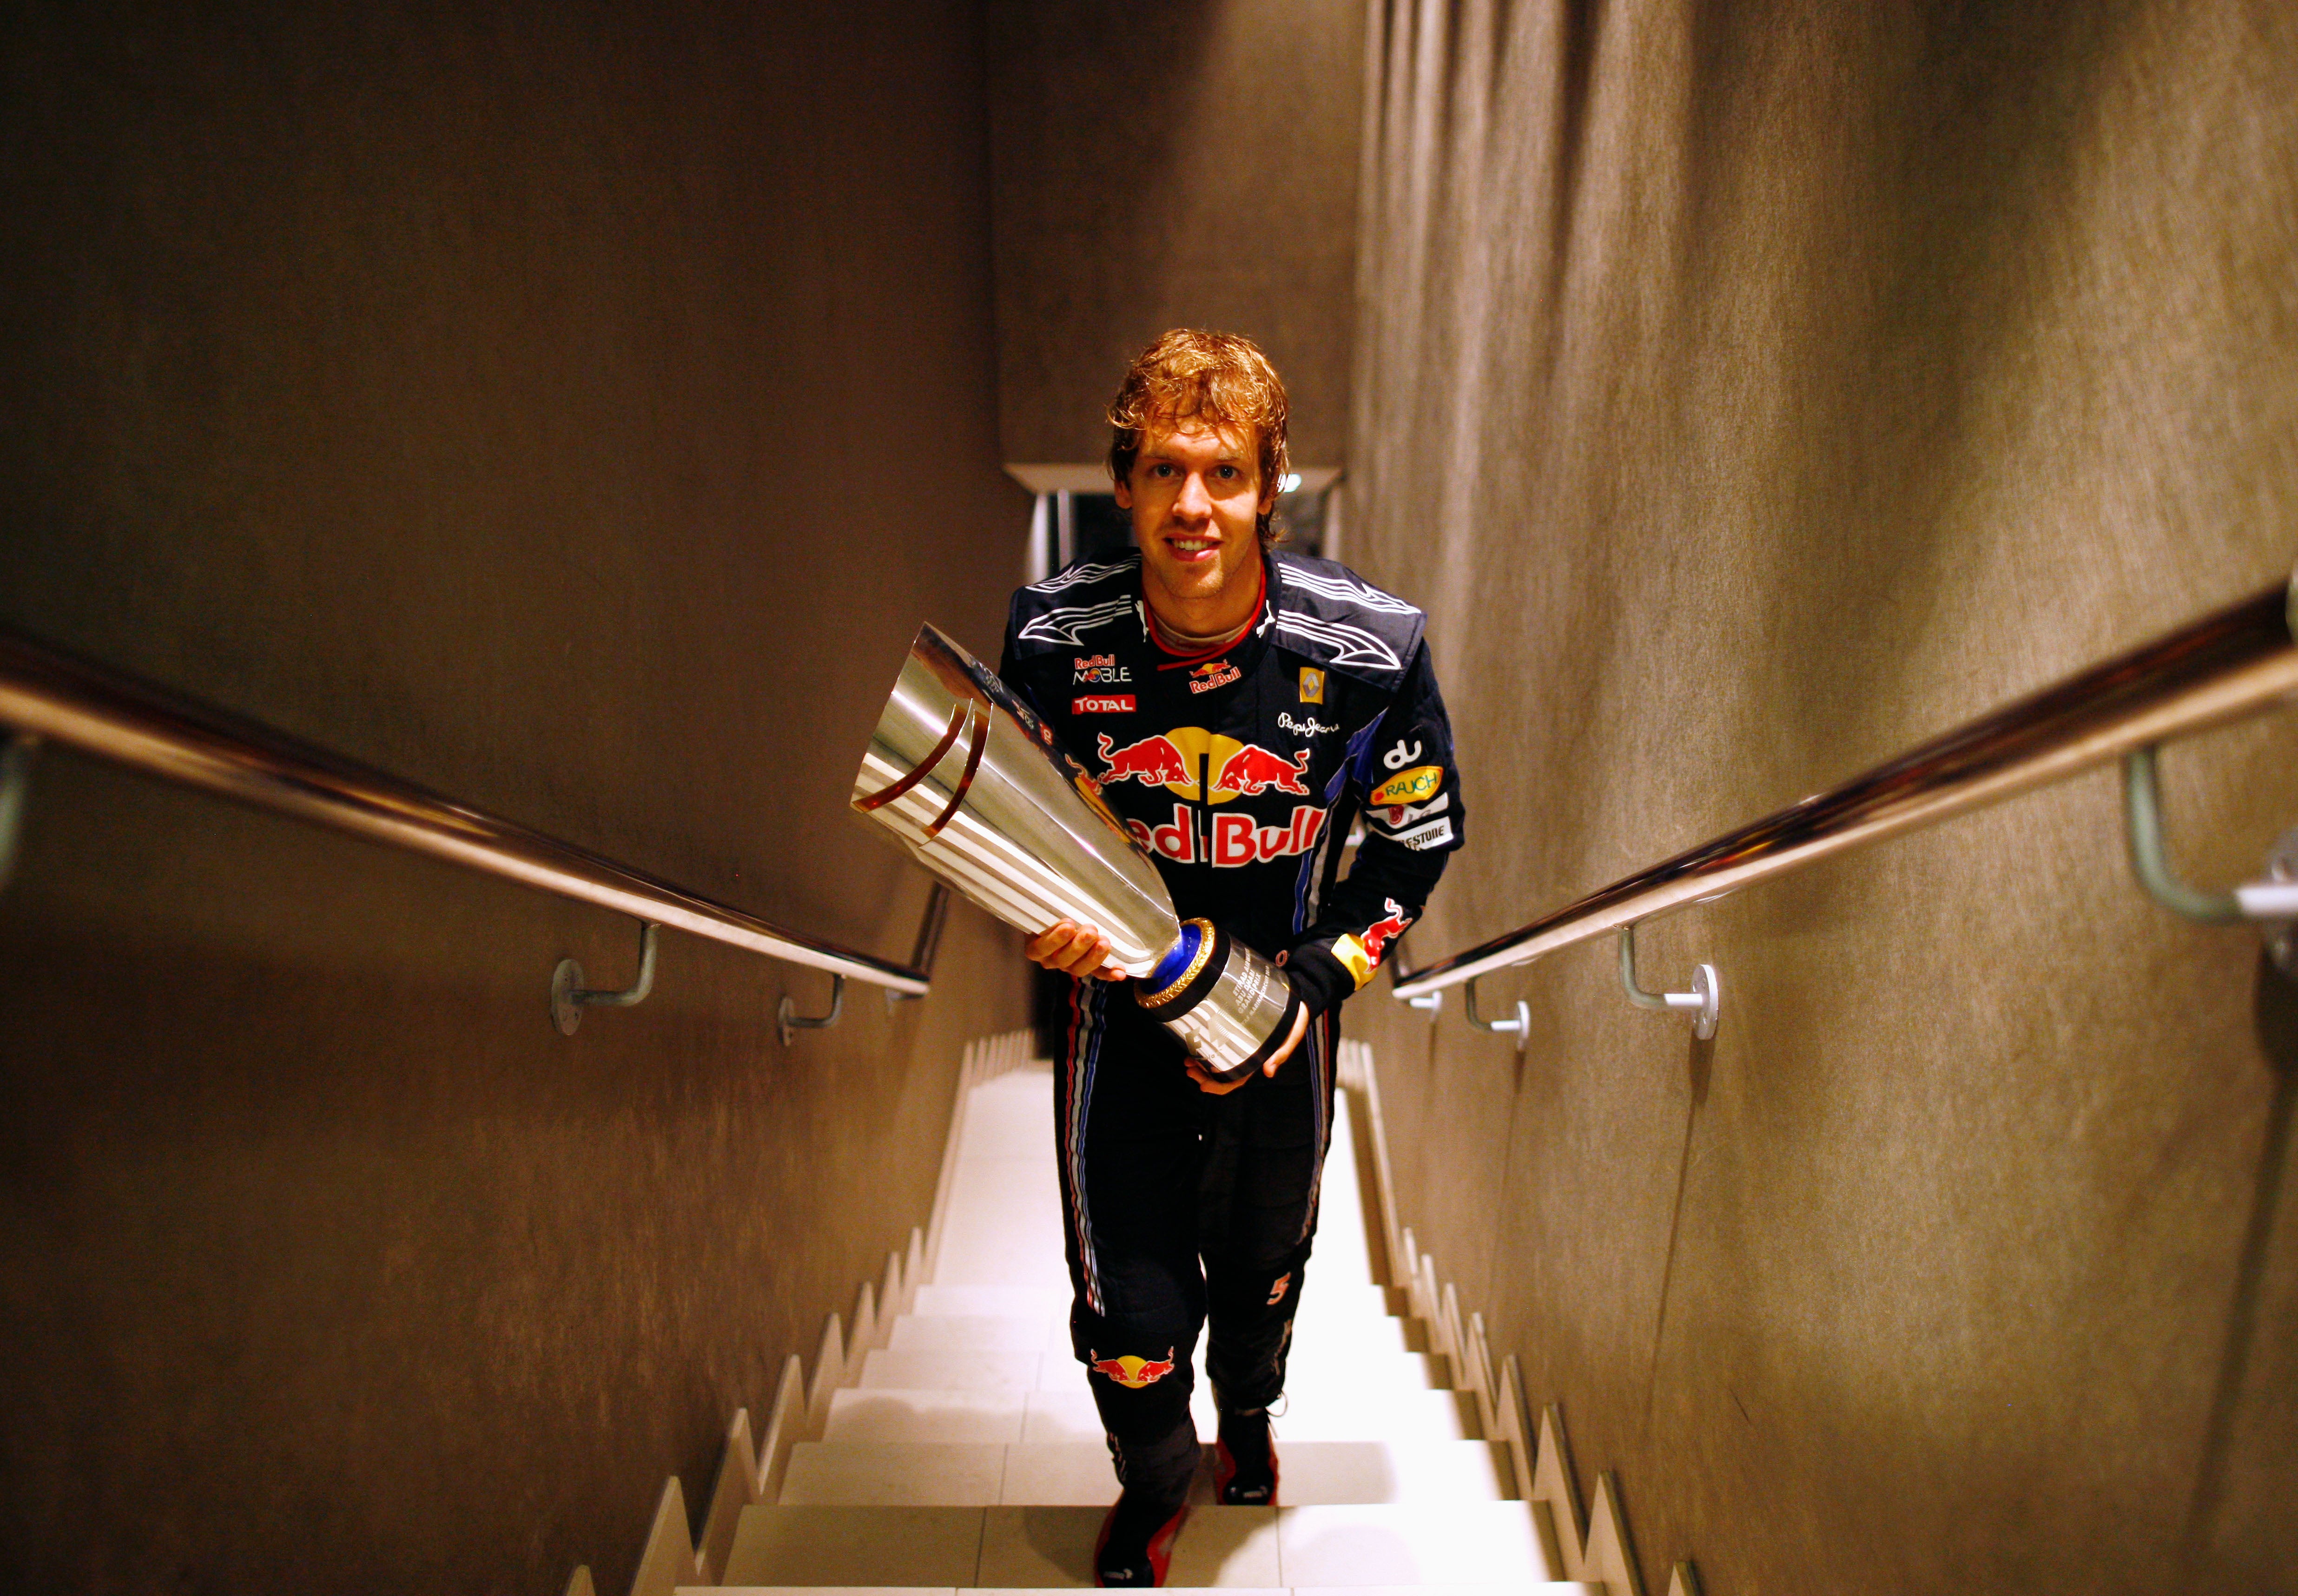 Sebastian Vettel carries his trophy after winning the 2010 world title in Abu Dhabi